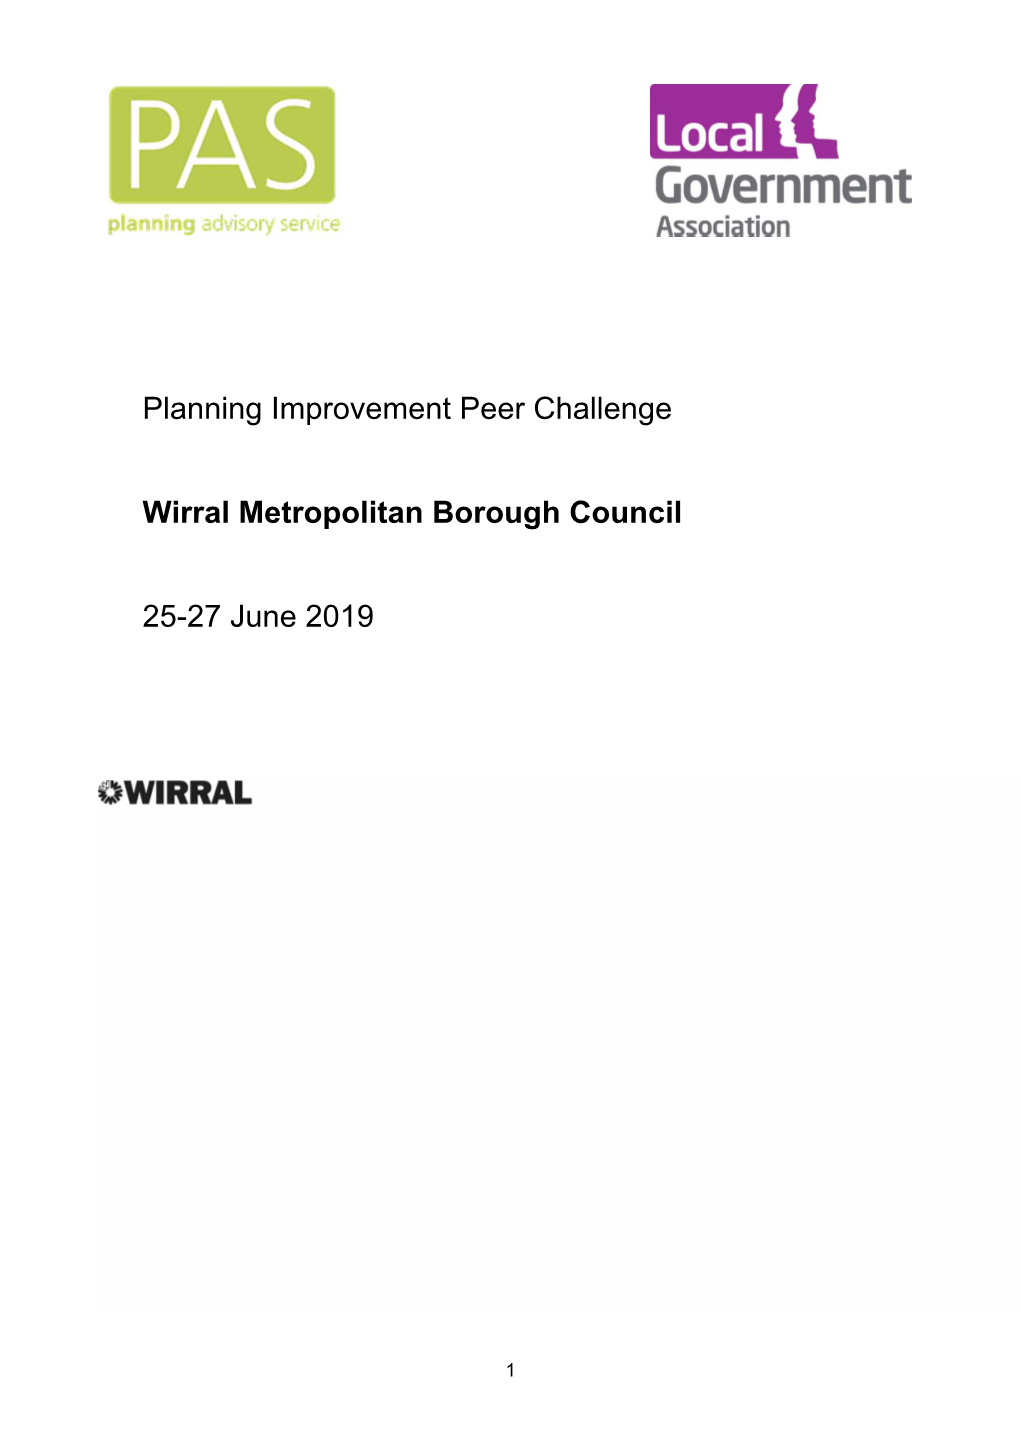 Wirral Council Planning Peer Review Final Report to Council July 29 2019